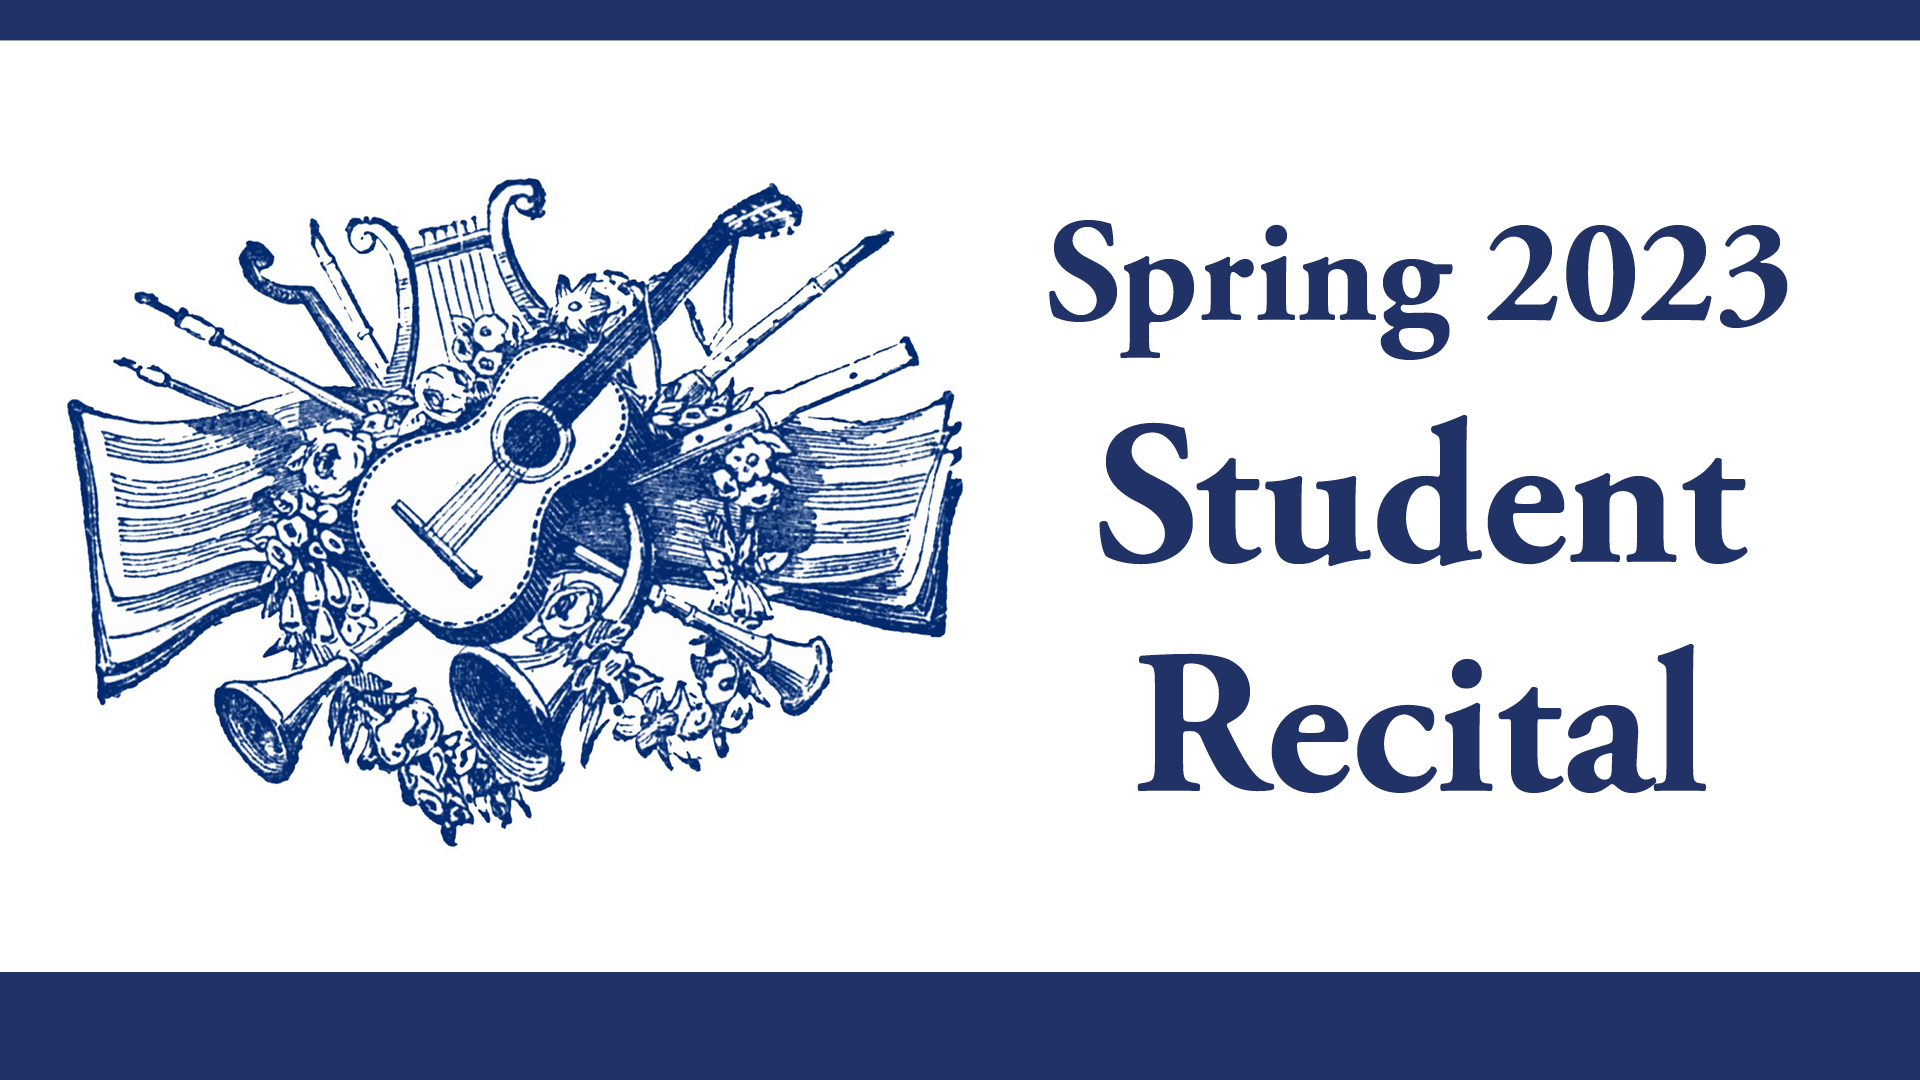 Spring 2023 recital, white background with blue text and image of instruments silhouettes